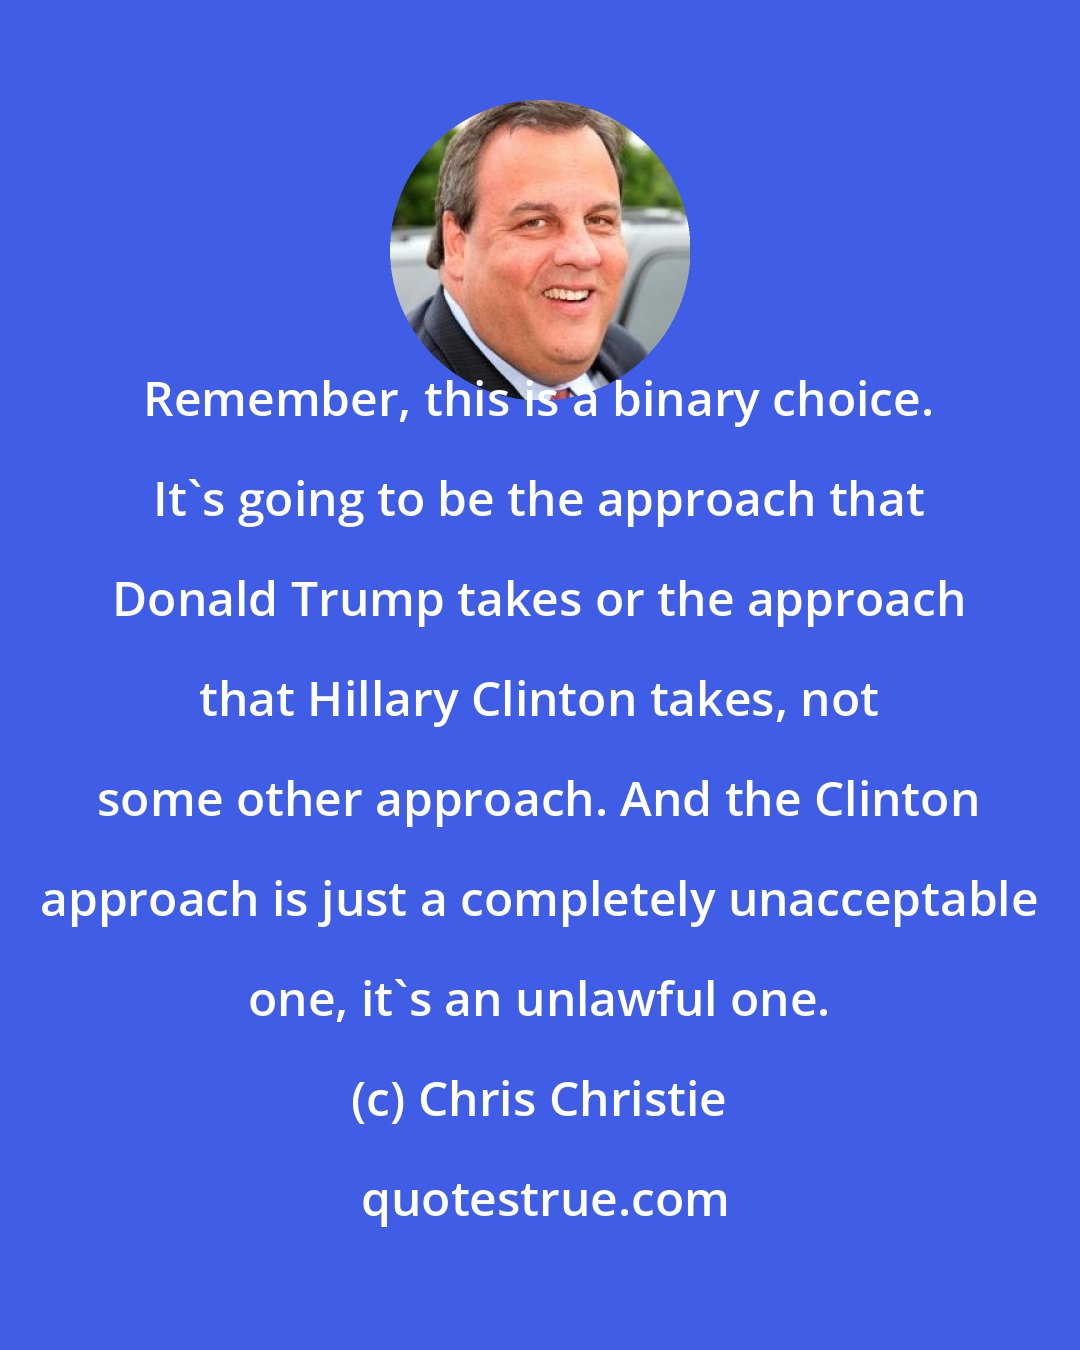 Chris Christie: Remember, this is a binary choice. It's going to be the approach that Donald Trump takes or the approach that Hillary Clinton takes, not some other approach. And the Clinton approach is just a completely unacceptable one, it's an unlawful one.